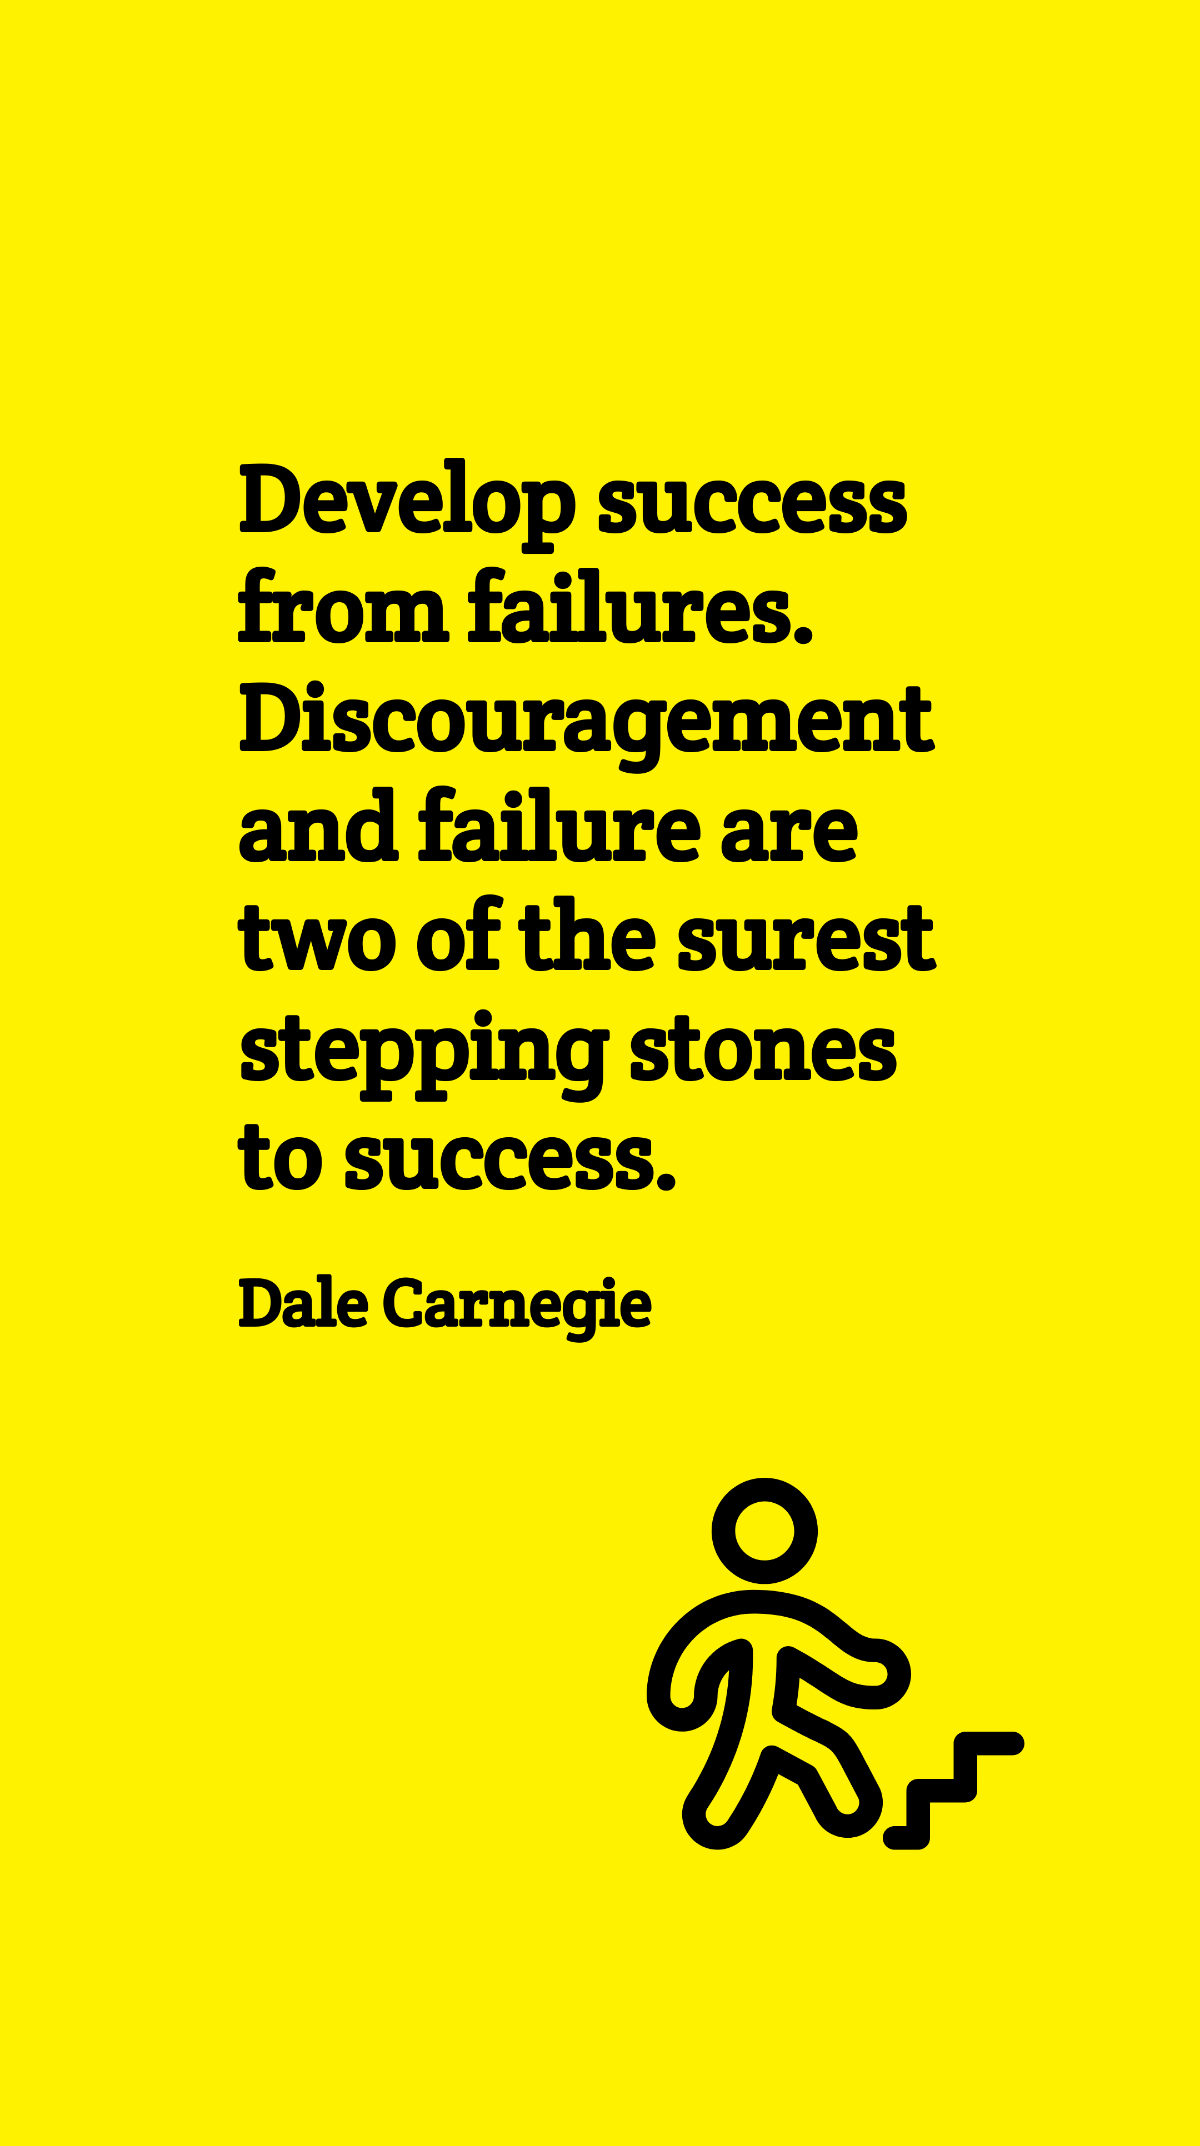 Dale Carnegie - Develop success from failures. Discouragement and failure are two of the surest stepping stones to success.